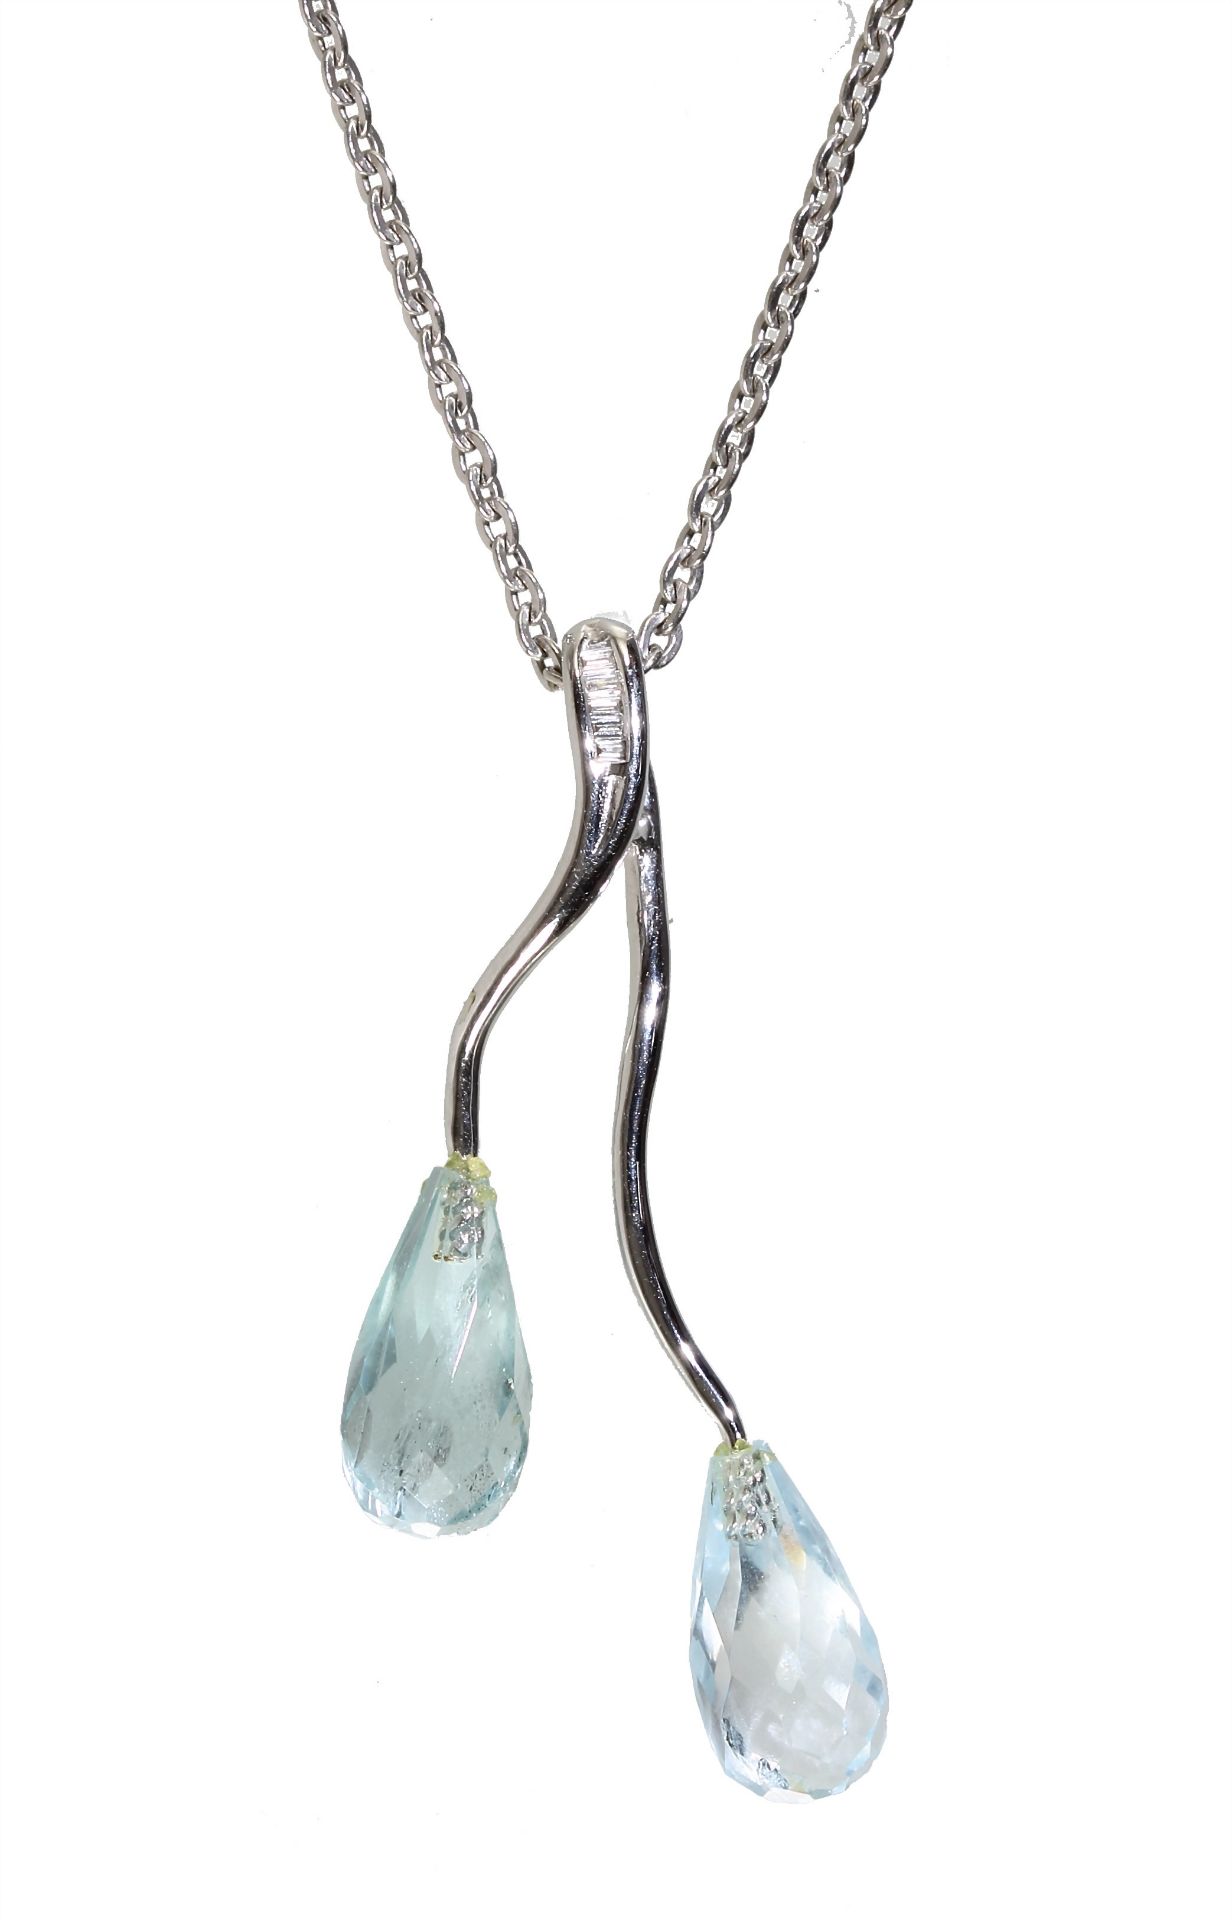 necklace: pendant, white gold 750/000, 2 faceted aquamarine drops, 5 diamonds with ...